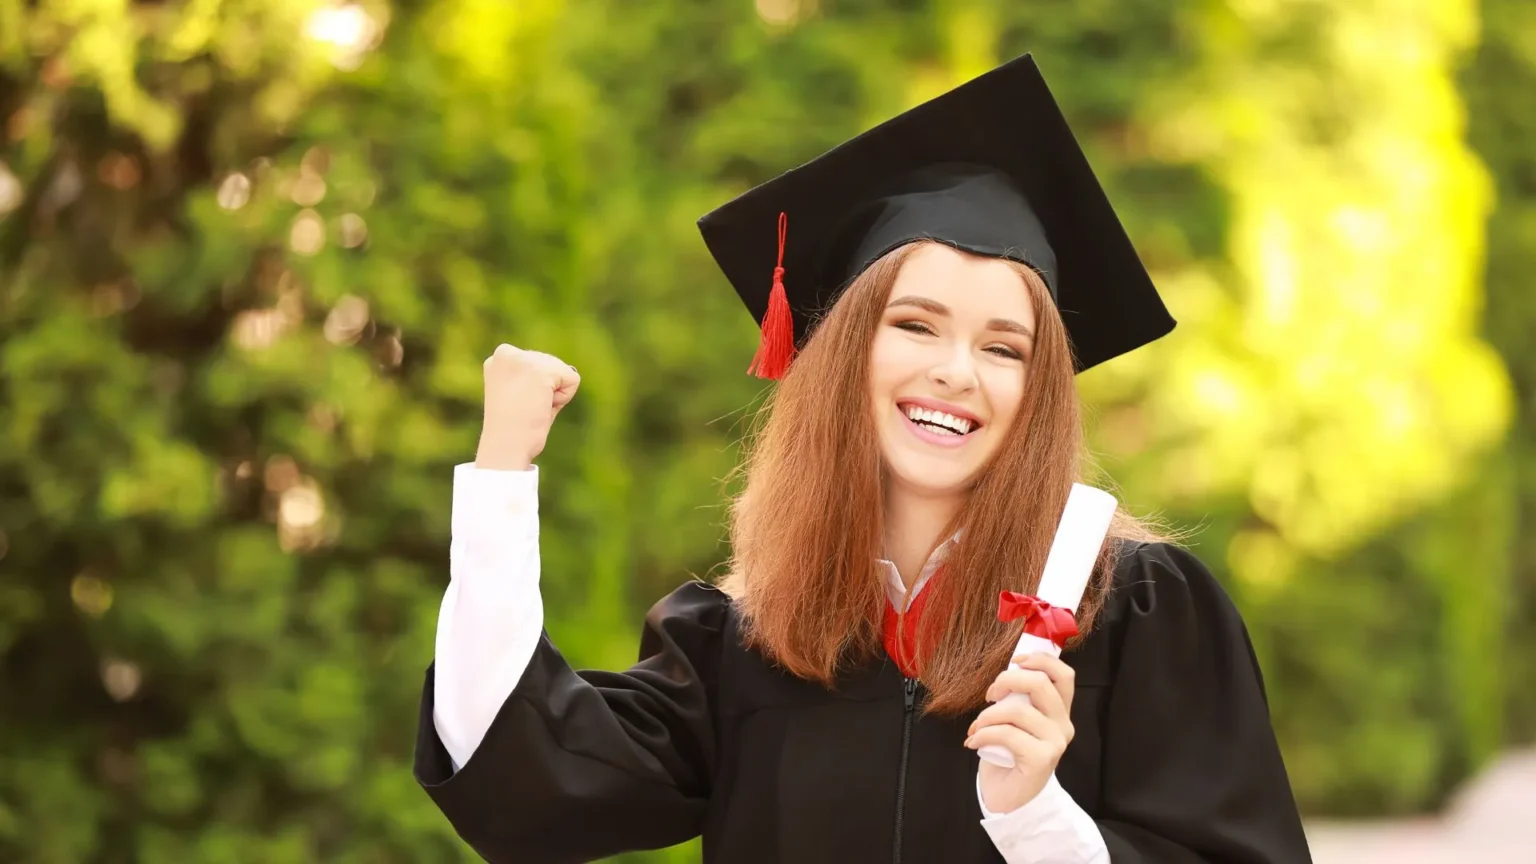 How to Get a Master's Degree for Free .how to get master's degree for free , how to get free master degree in usa ,how to get a master's degree for free online , how can i get a master's degree for free , how to get a masters in education for free